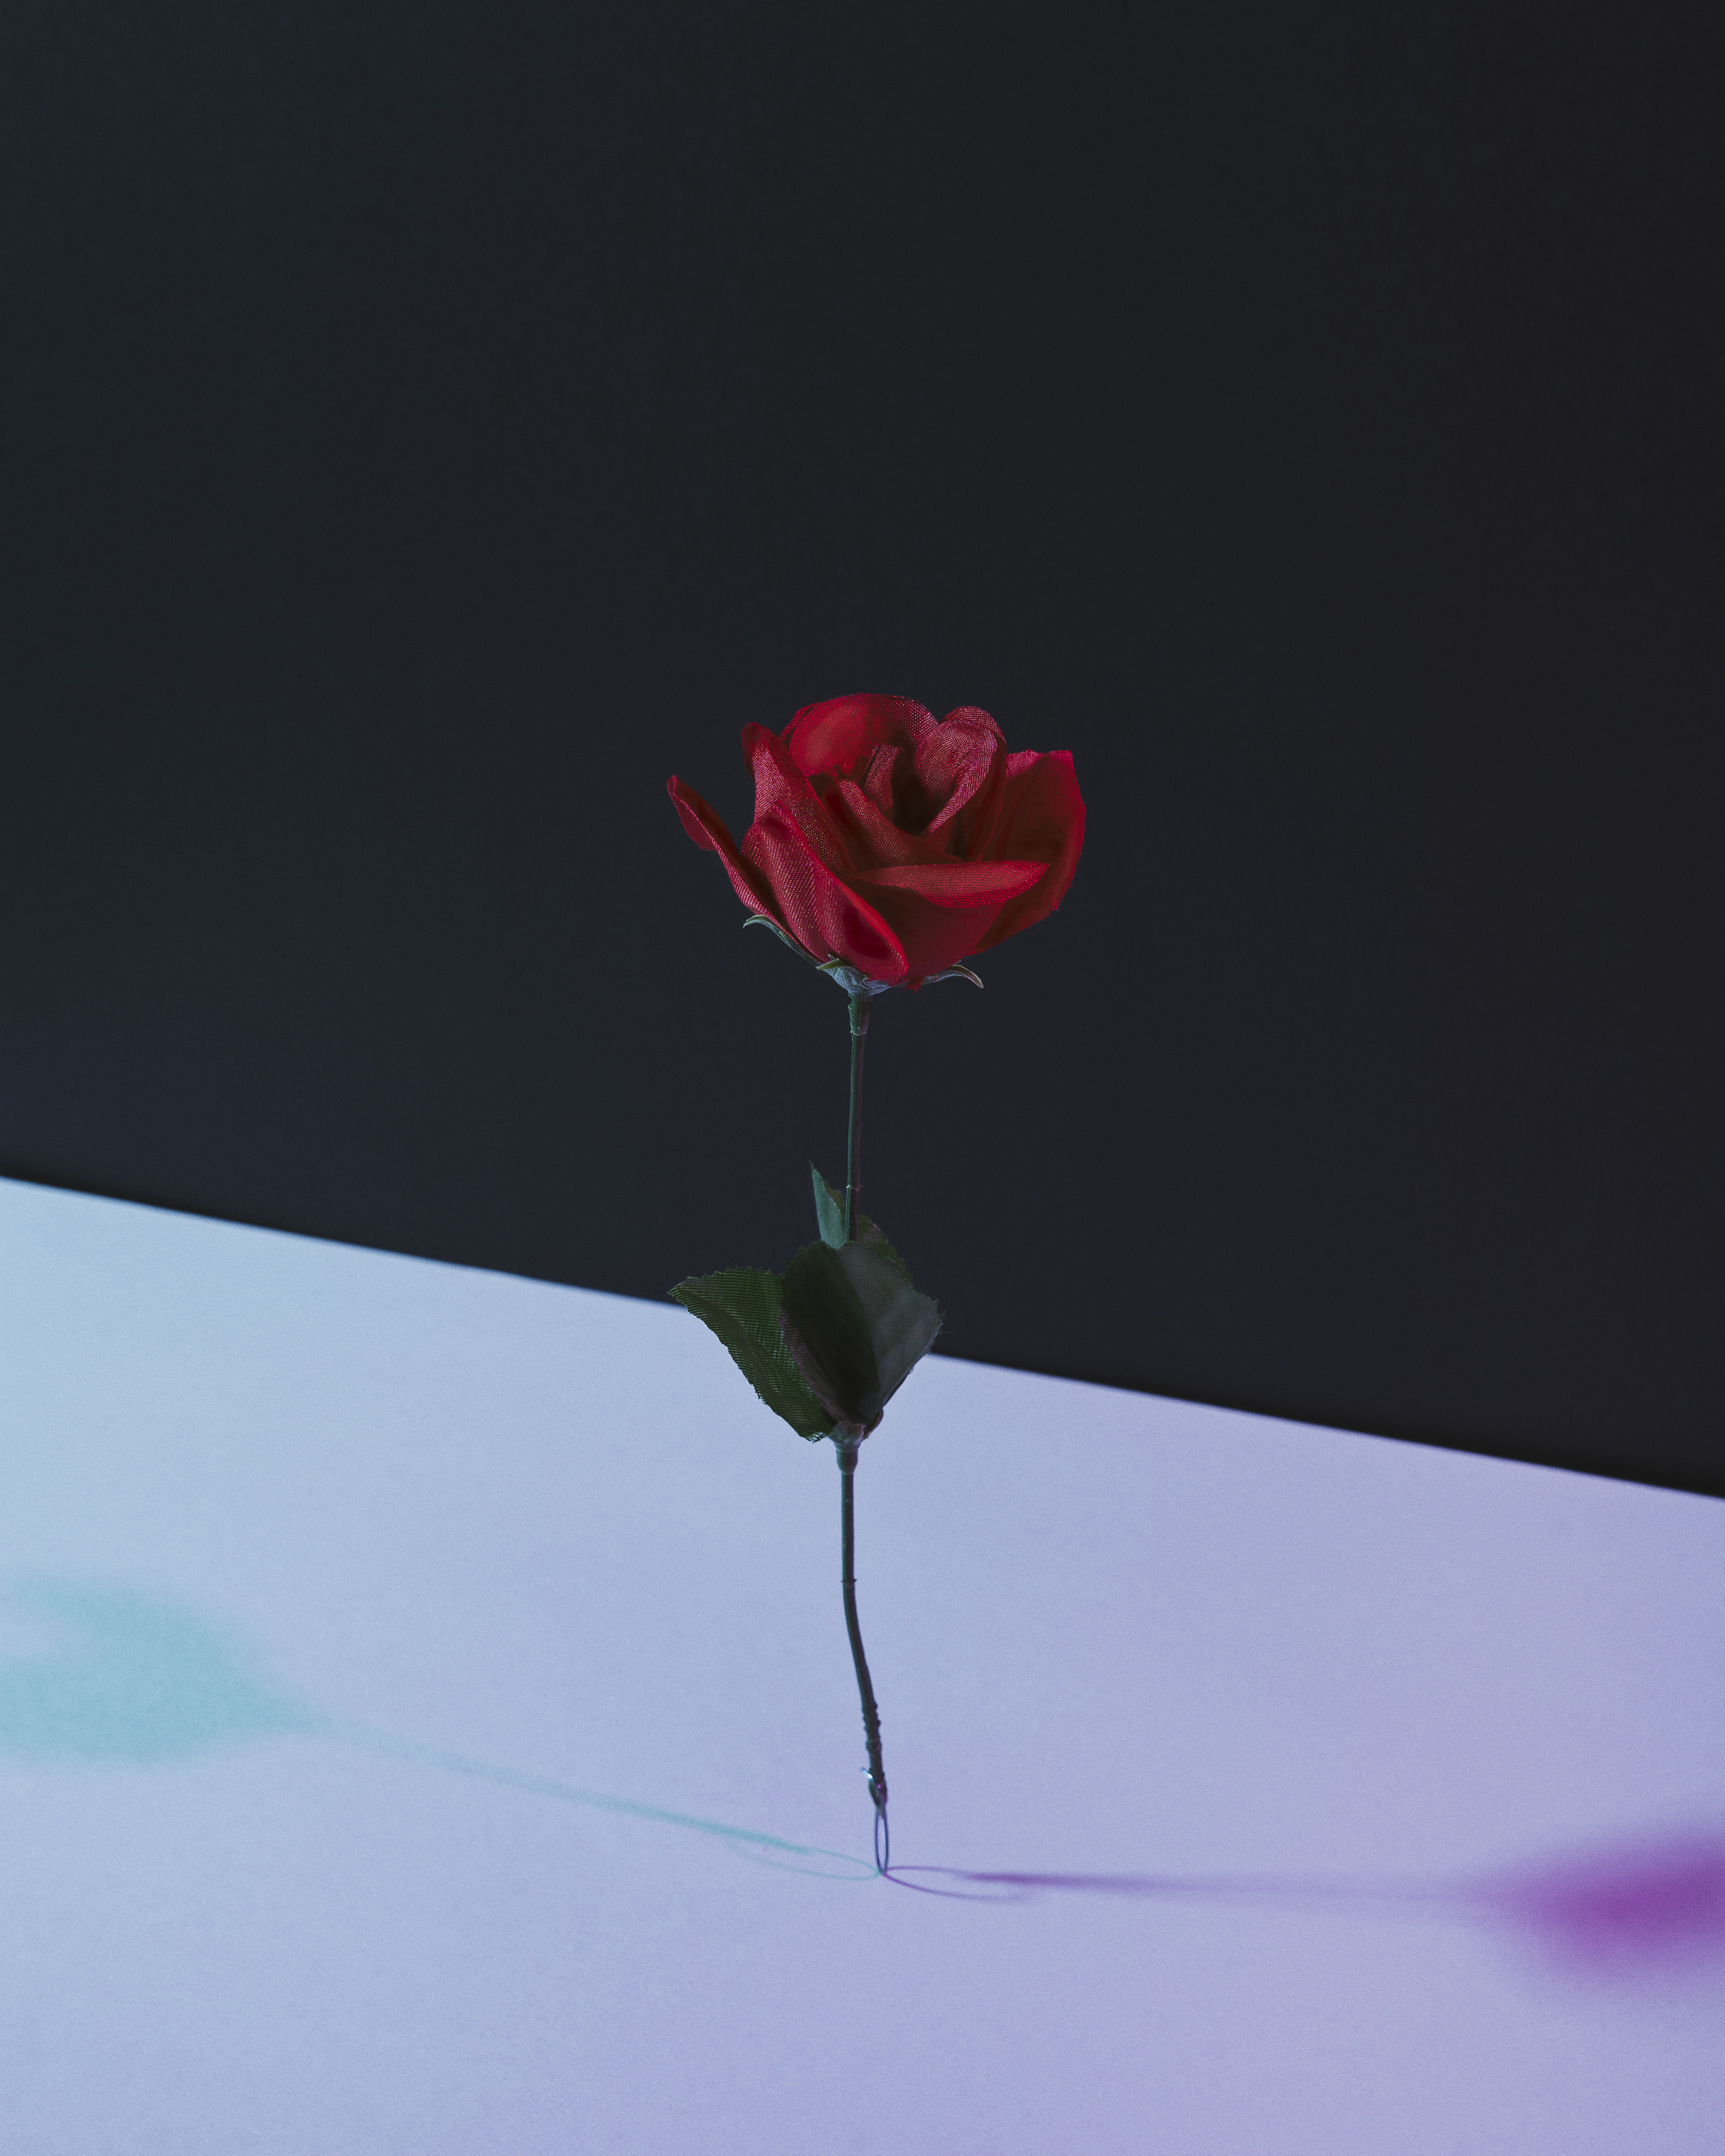 Archival pigment print of a rose on baryta paper by artist and UNT alum Jack Dockins.